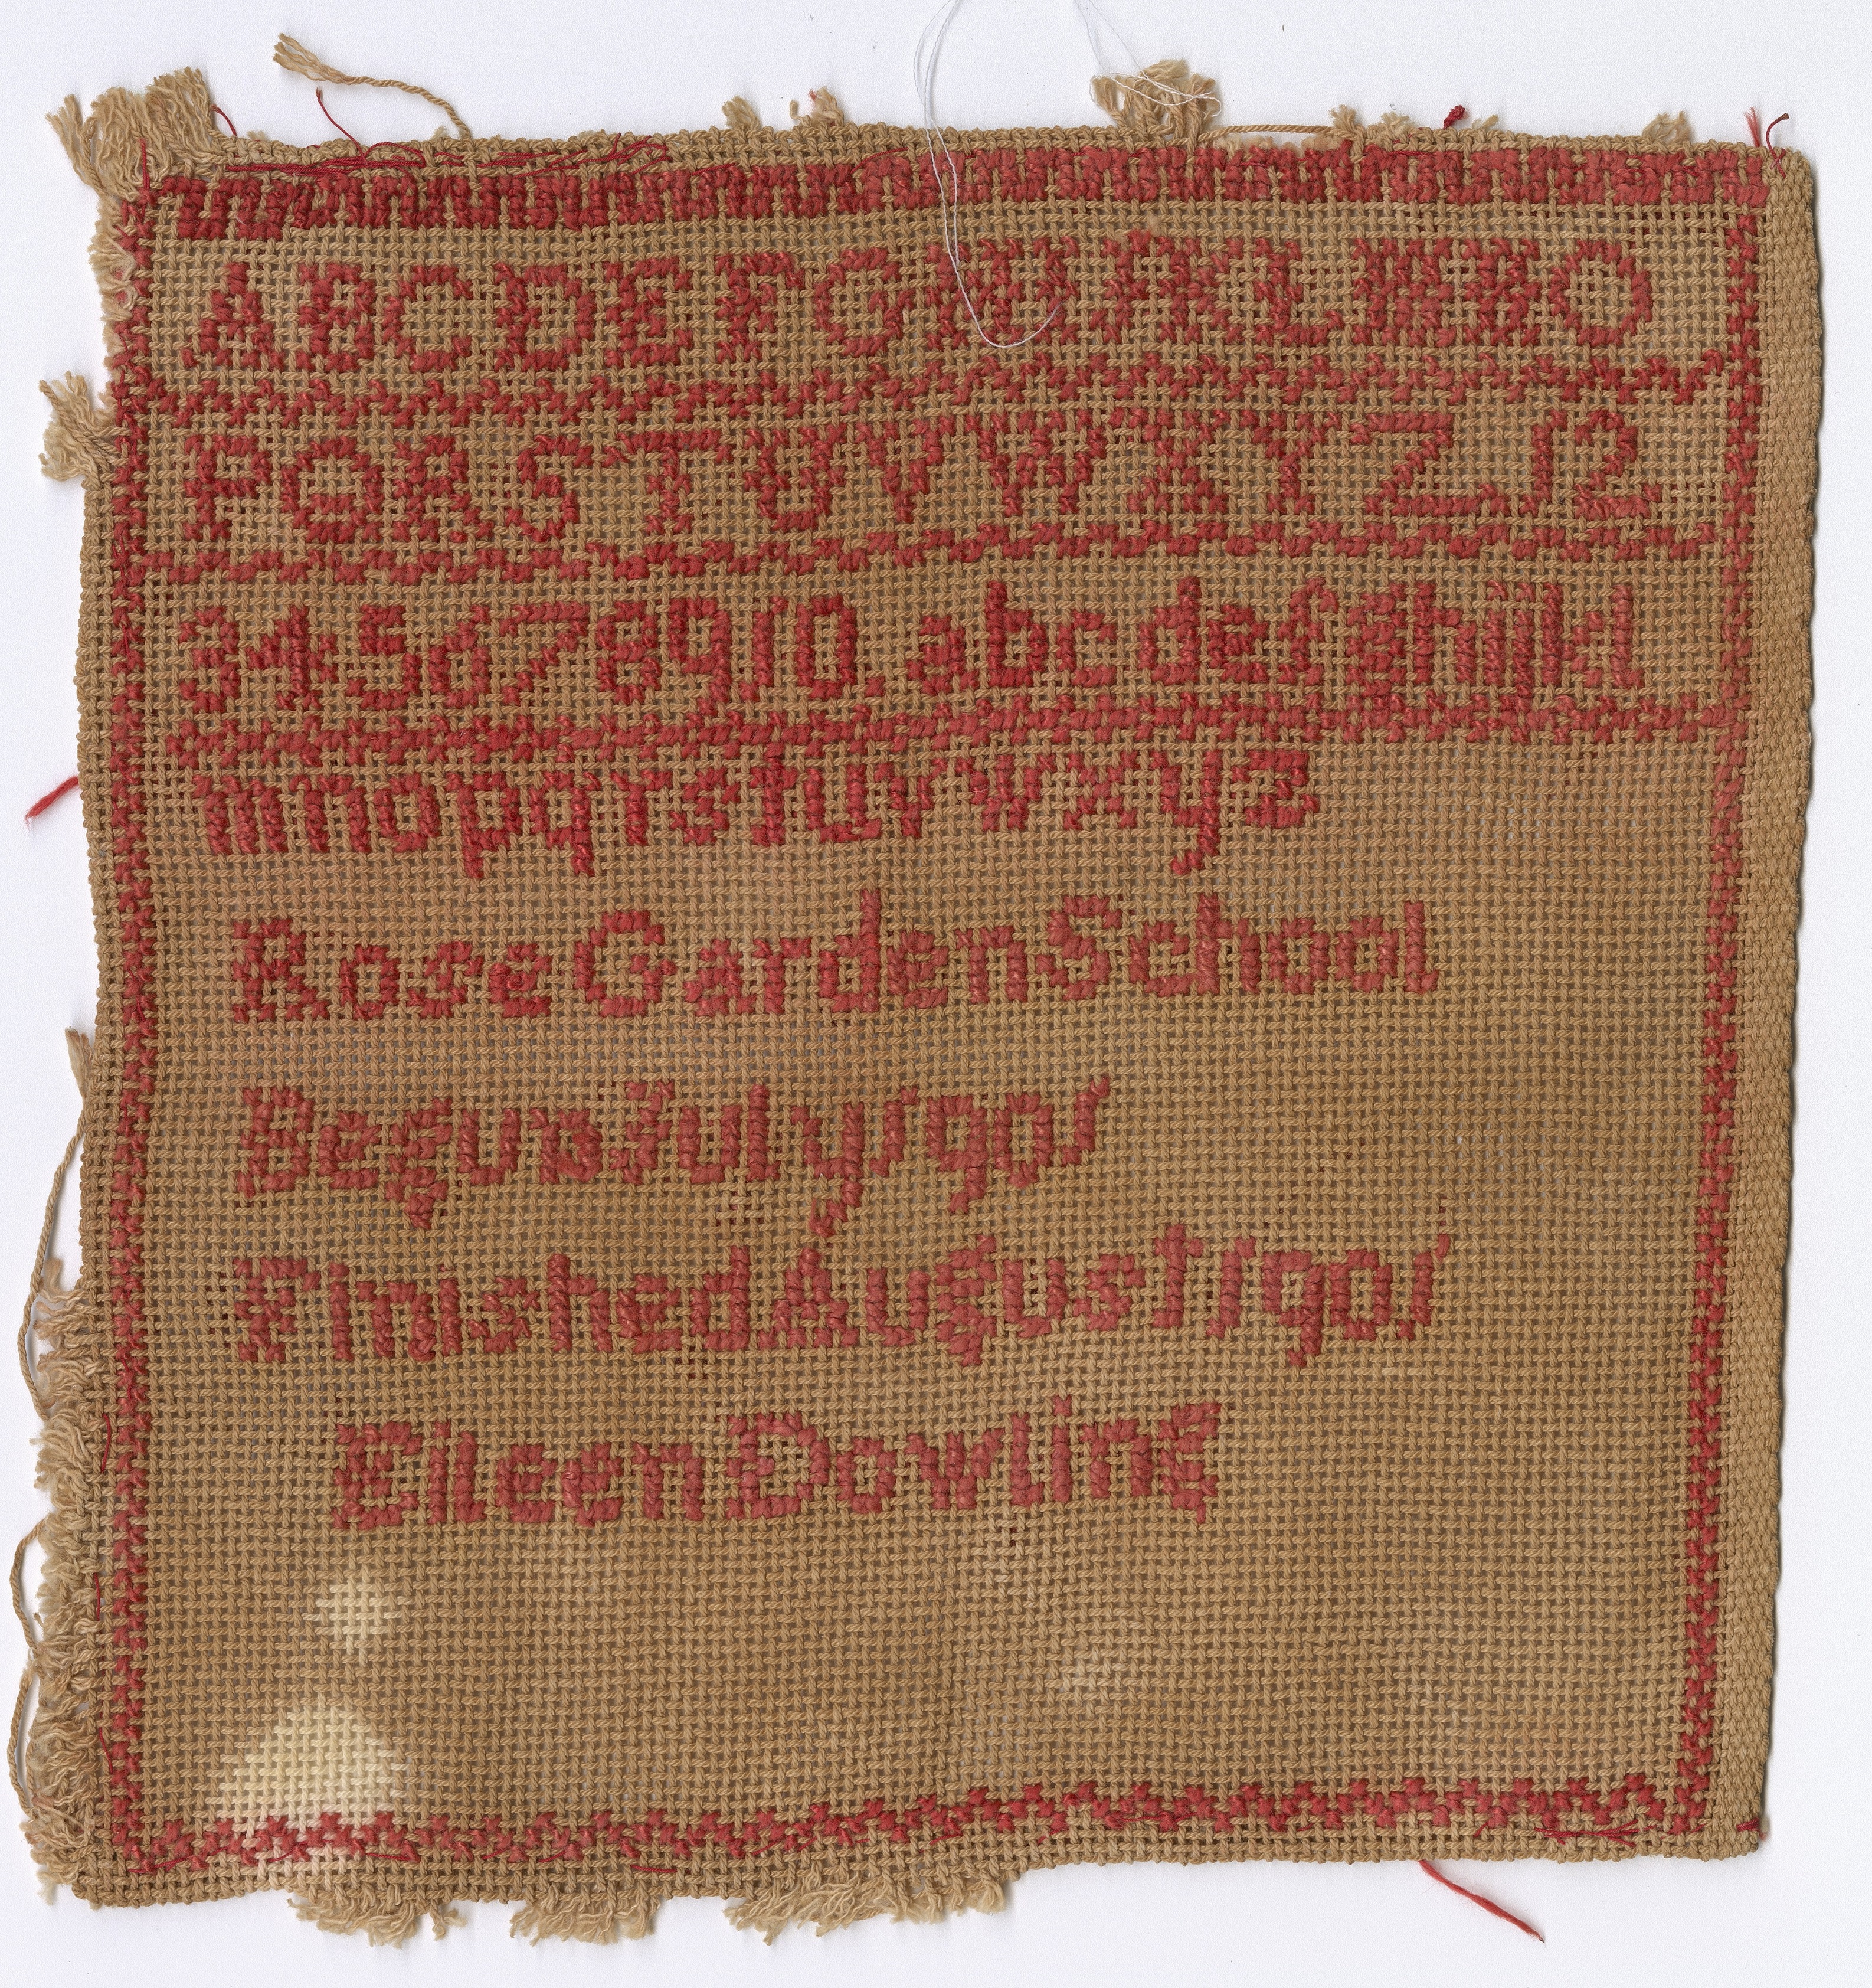 Cross stitch embroidery sampler created by Eileen Dowling, 1901, SLSA: D 8939.